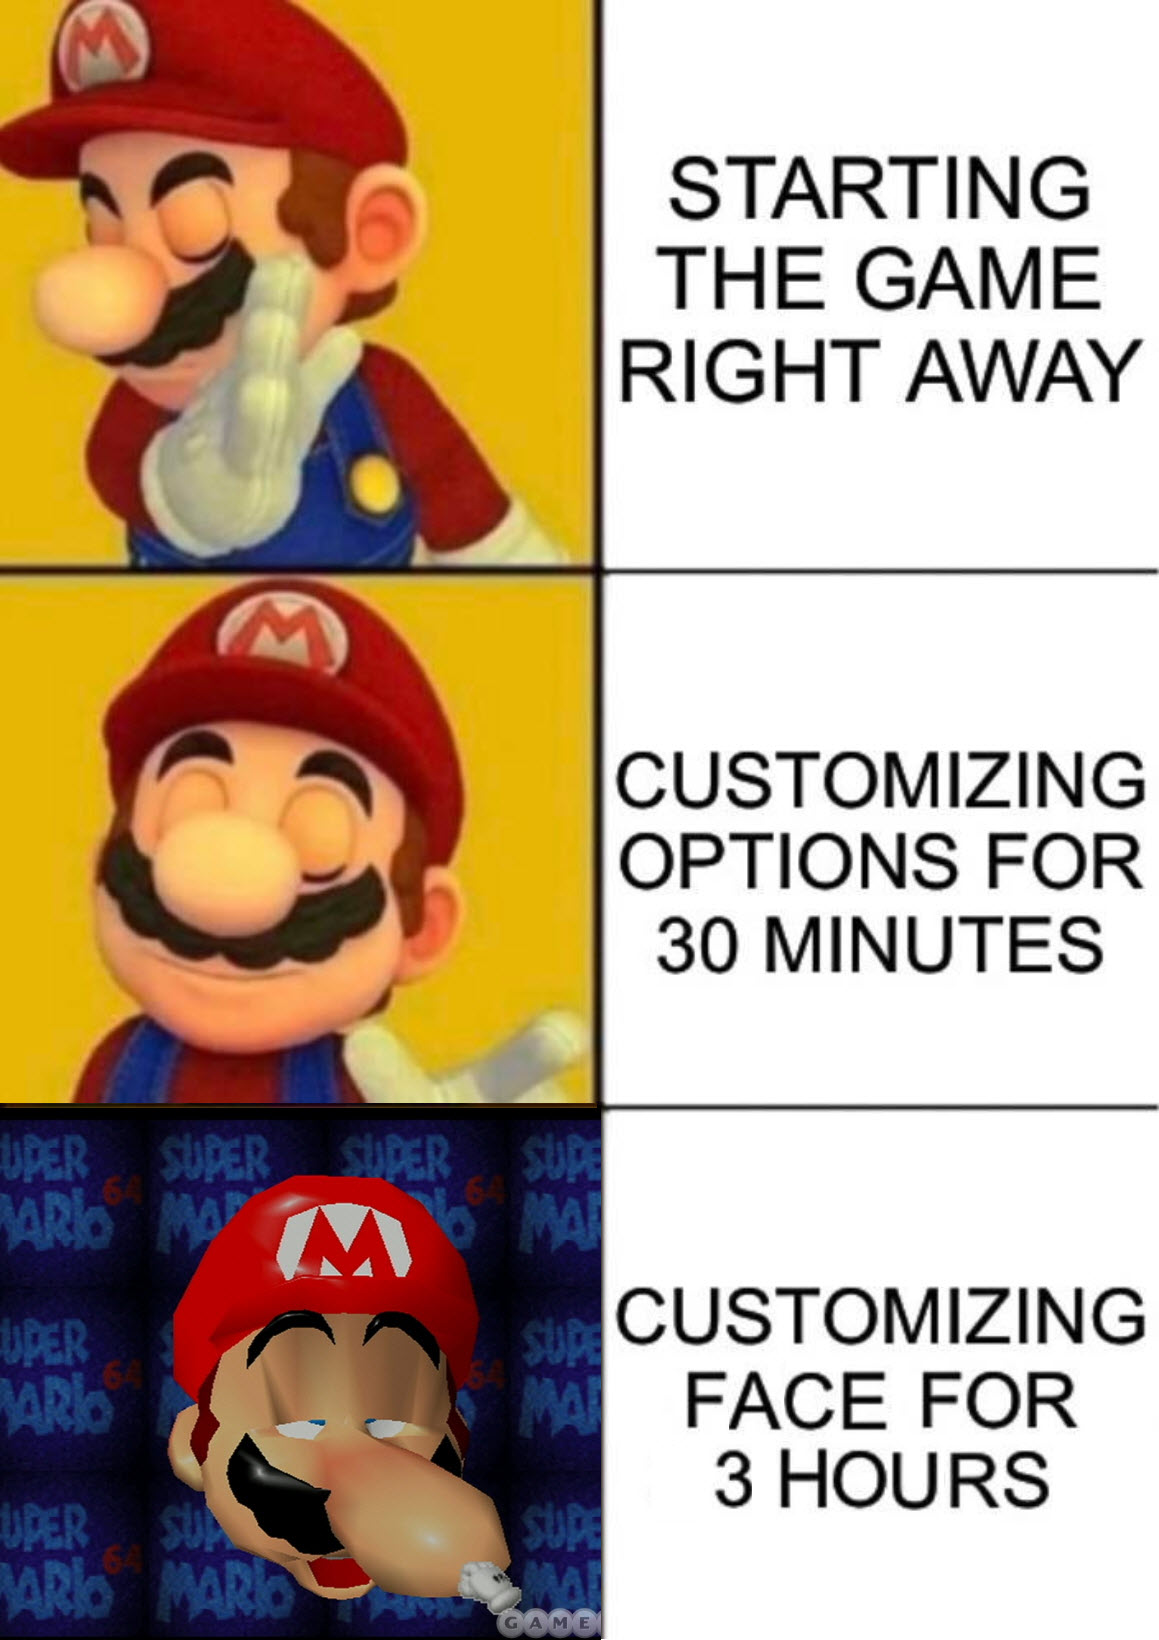 funny gaming memes - video game memes - 3 Starting The Game Right Away Customizing Options For 30 Minutes Uper Super Super Sur Mario M M M Uper Sucustomizing Arlo Face For 3 Hours Uper Suas Mario Mario Game